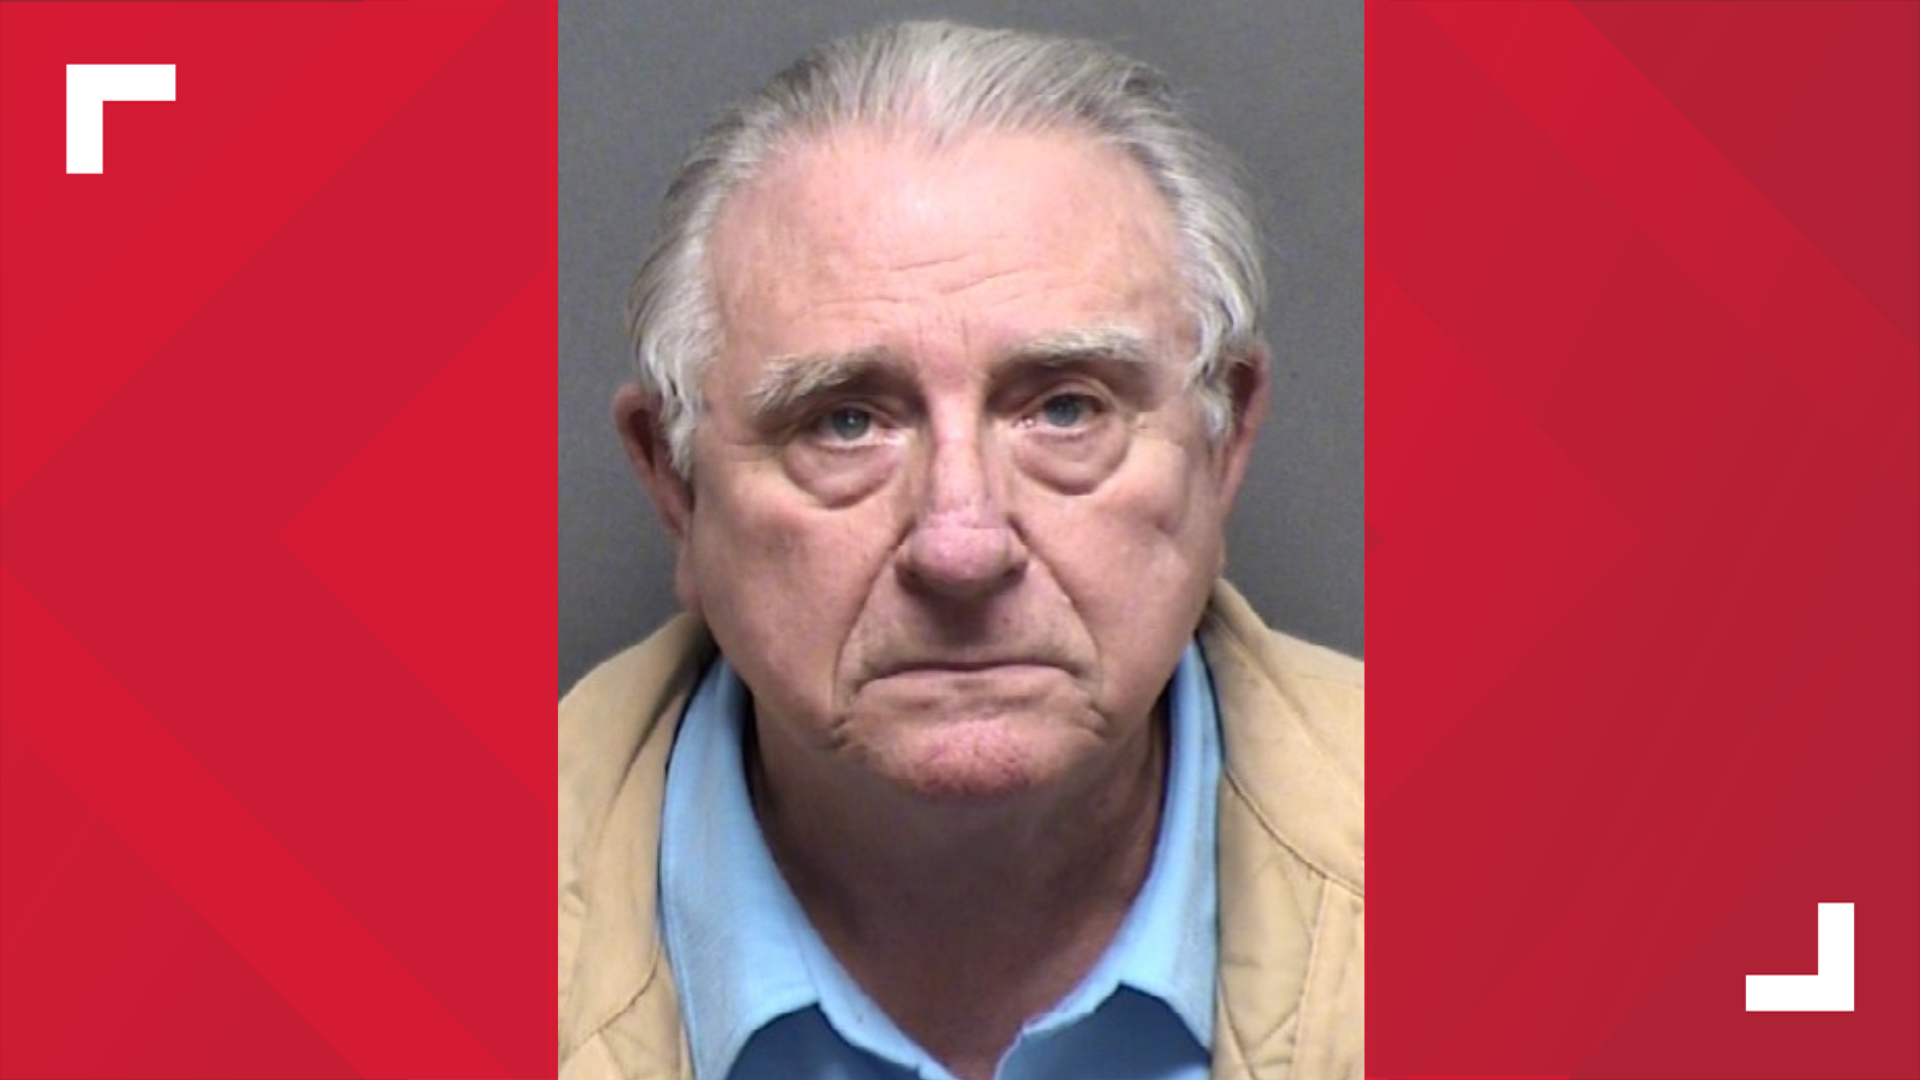 76-year-old man sentenced to 80 years in prison in connection to state, federal child sex charges kens5 pic